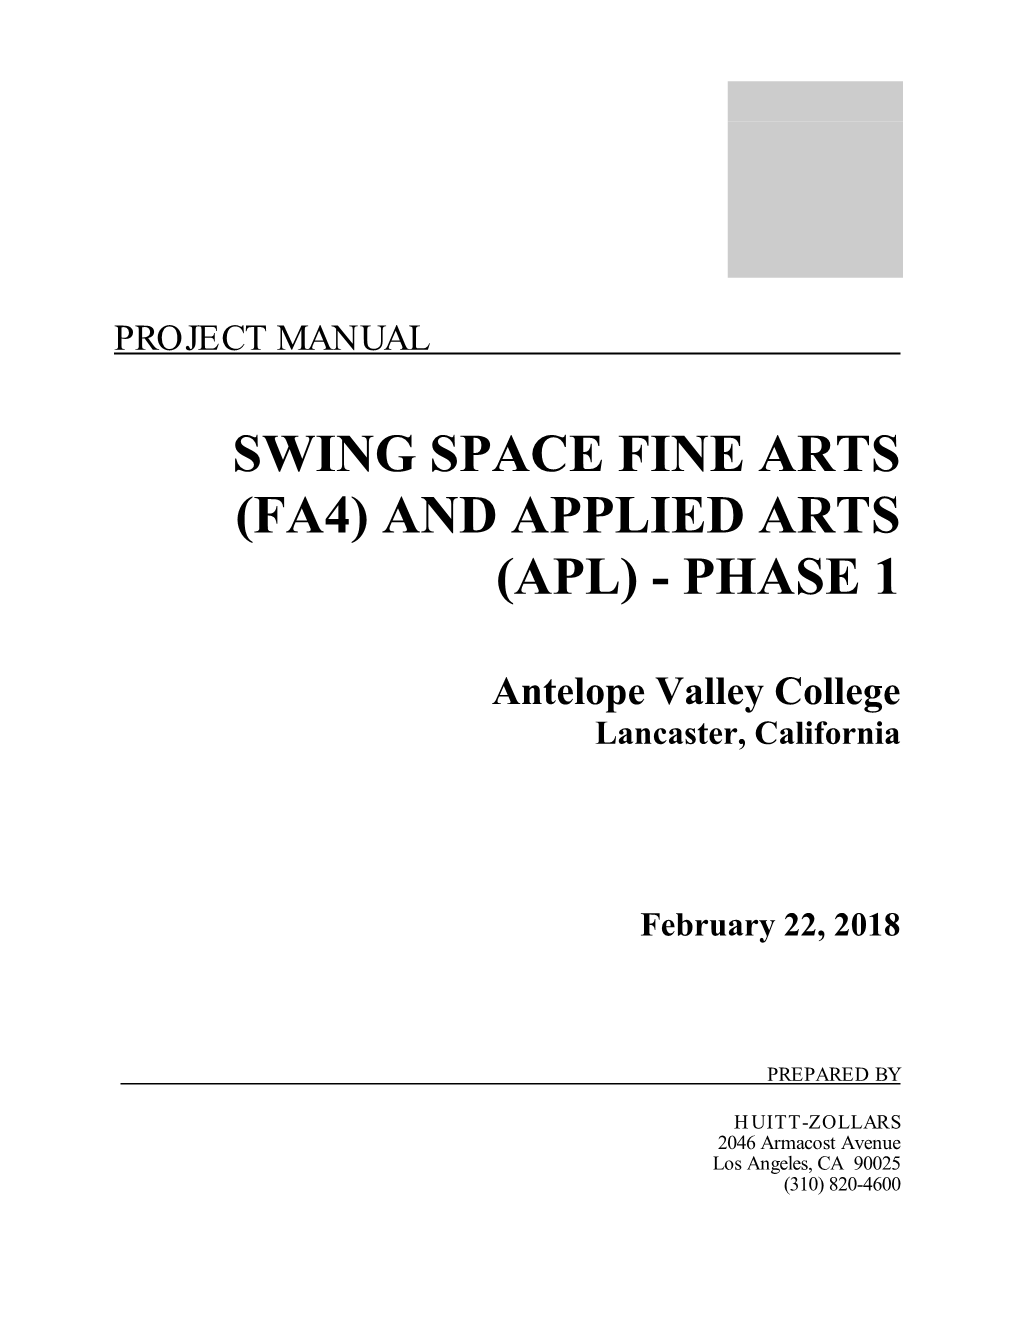 Swing Space Fine Arts (Fa4) and Applied Arts (Apl) - Phase 1